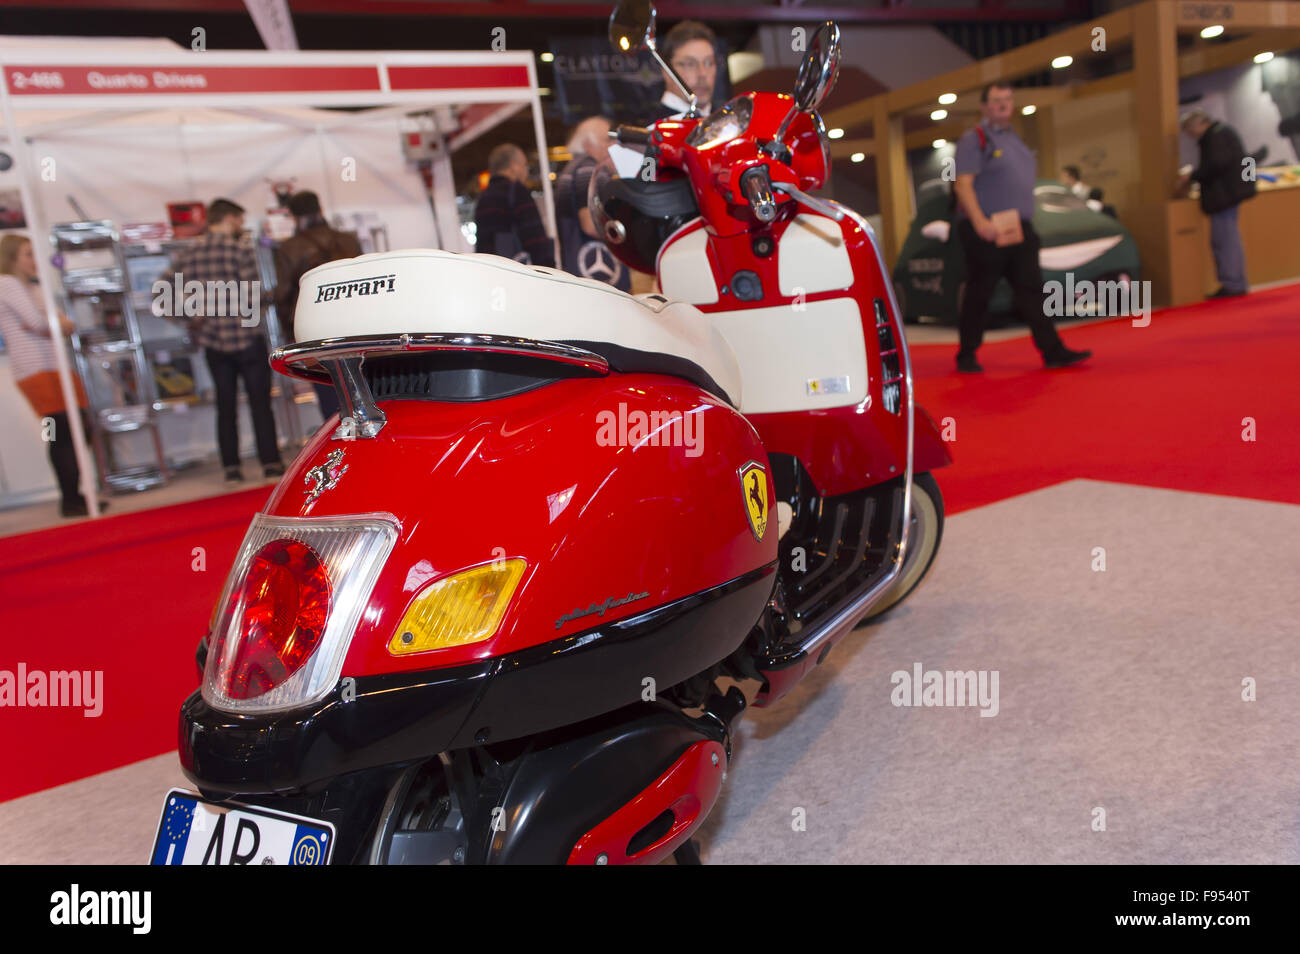 Classic Motor Show 2015 at The NEC Birmingham. A Ferrari Scooter for under  £6,000 with 3,000 miles on the clock. A Blackpool based tailor made  vehicles company called Void Auto have made